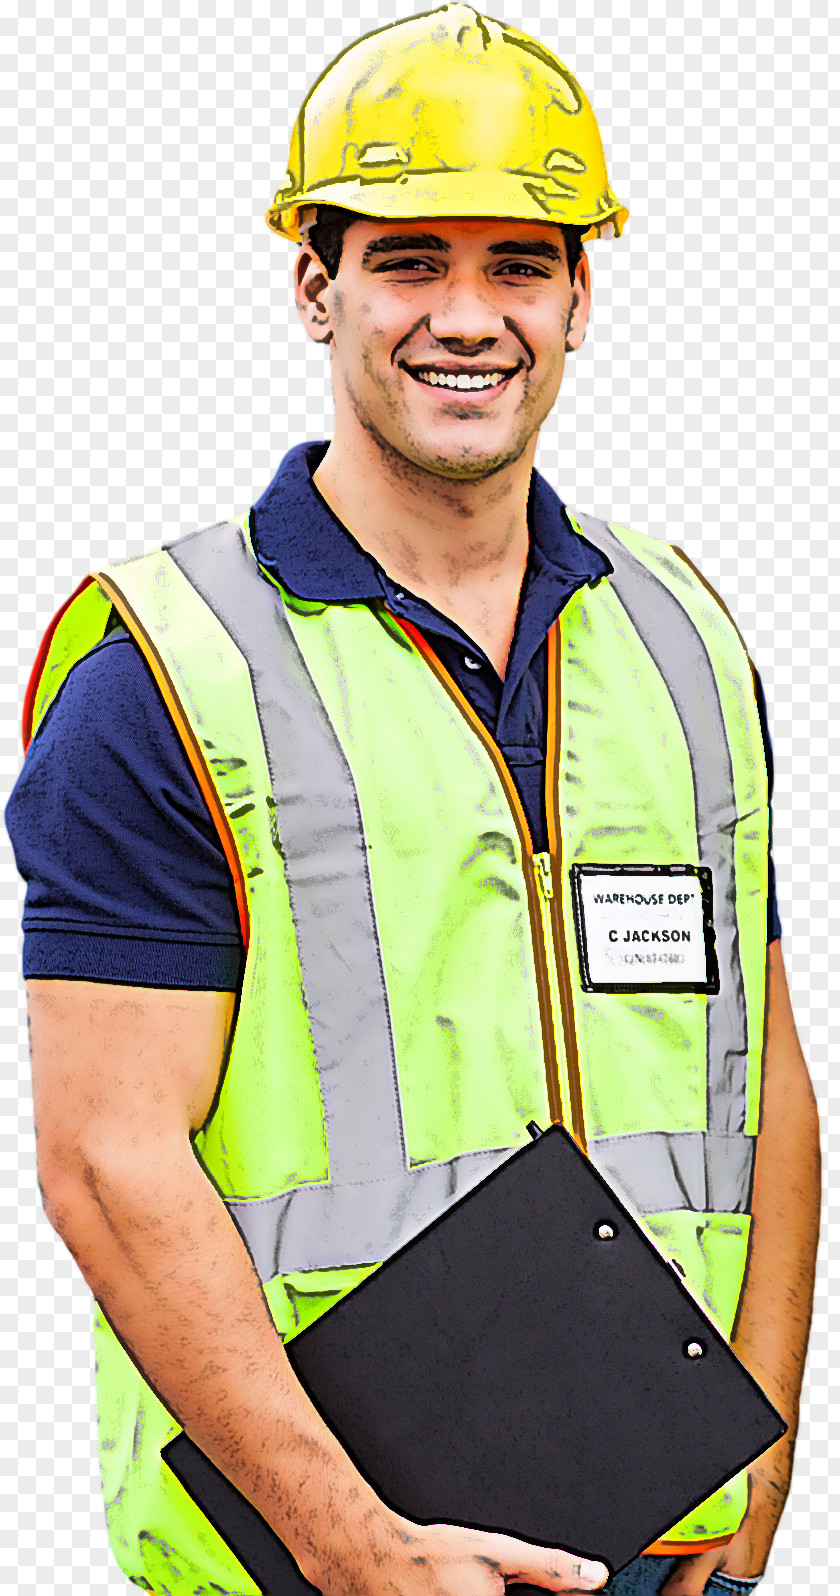 Sleeve Engineer High-visibility Clothing Personal Protective Equipment Yellow Workwear Headgear PNG